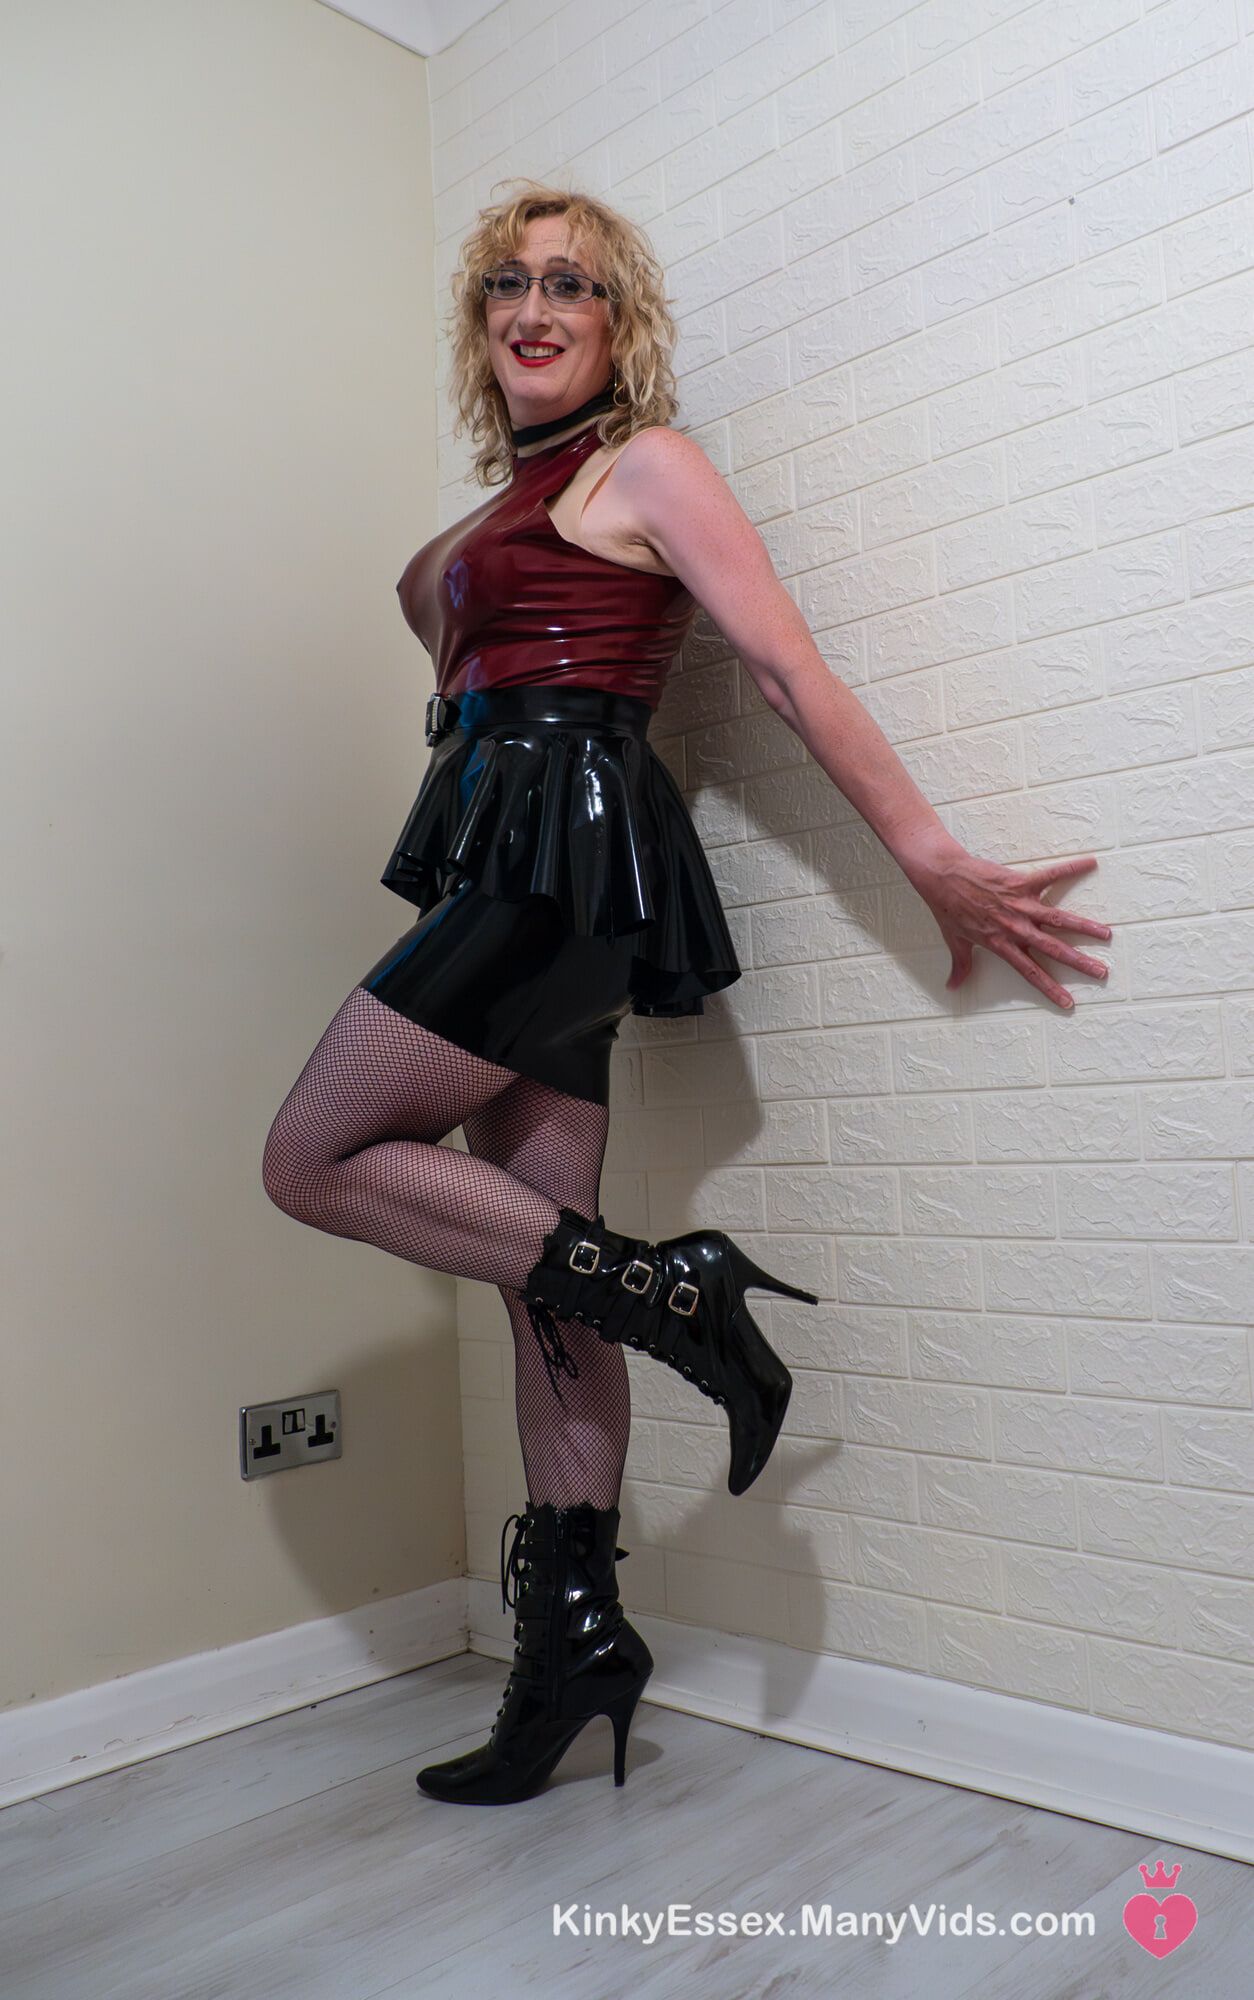 Colour Latex Dress, Boots and Fishnets on British Milf #8